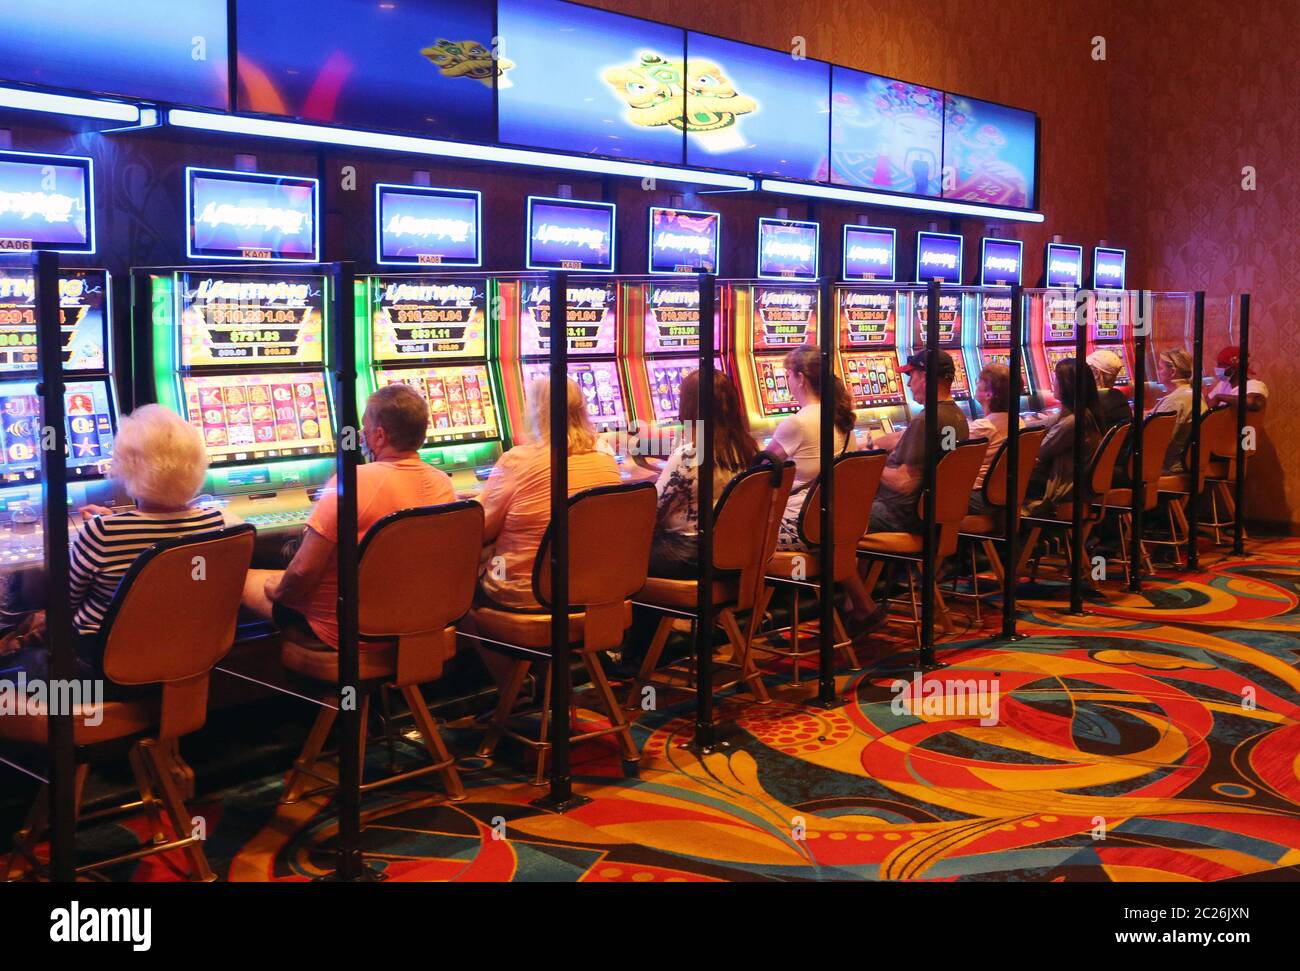 Maryland Heights, United States. 16th June, 2020. Guests play machines with plexiglass dividers between each other at the Hollywood Hotel and Casino, on day one of reopening to the public in Maryland Heights, Missouri on Tuesday, June 16, 2020. After being closed for nearly three months because of COVID-19 concerns, guests will now be asked questions about their health before being admitted to the casino floor, plexi-glass separators are installed between machines and guests are encouraged to wear masks while using the machines. Photo by Bill Greenblatt/UPI Credit: UPI/Alamy Live News Stock Photo